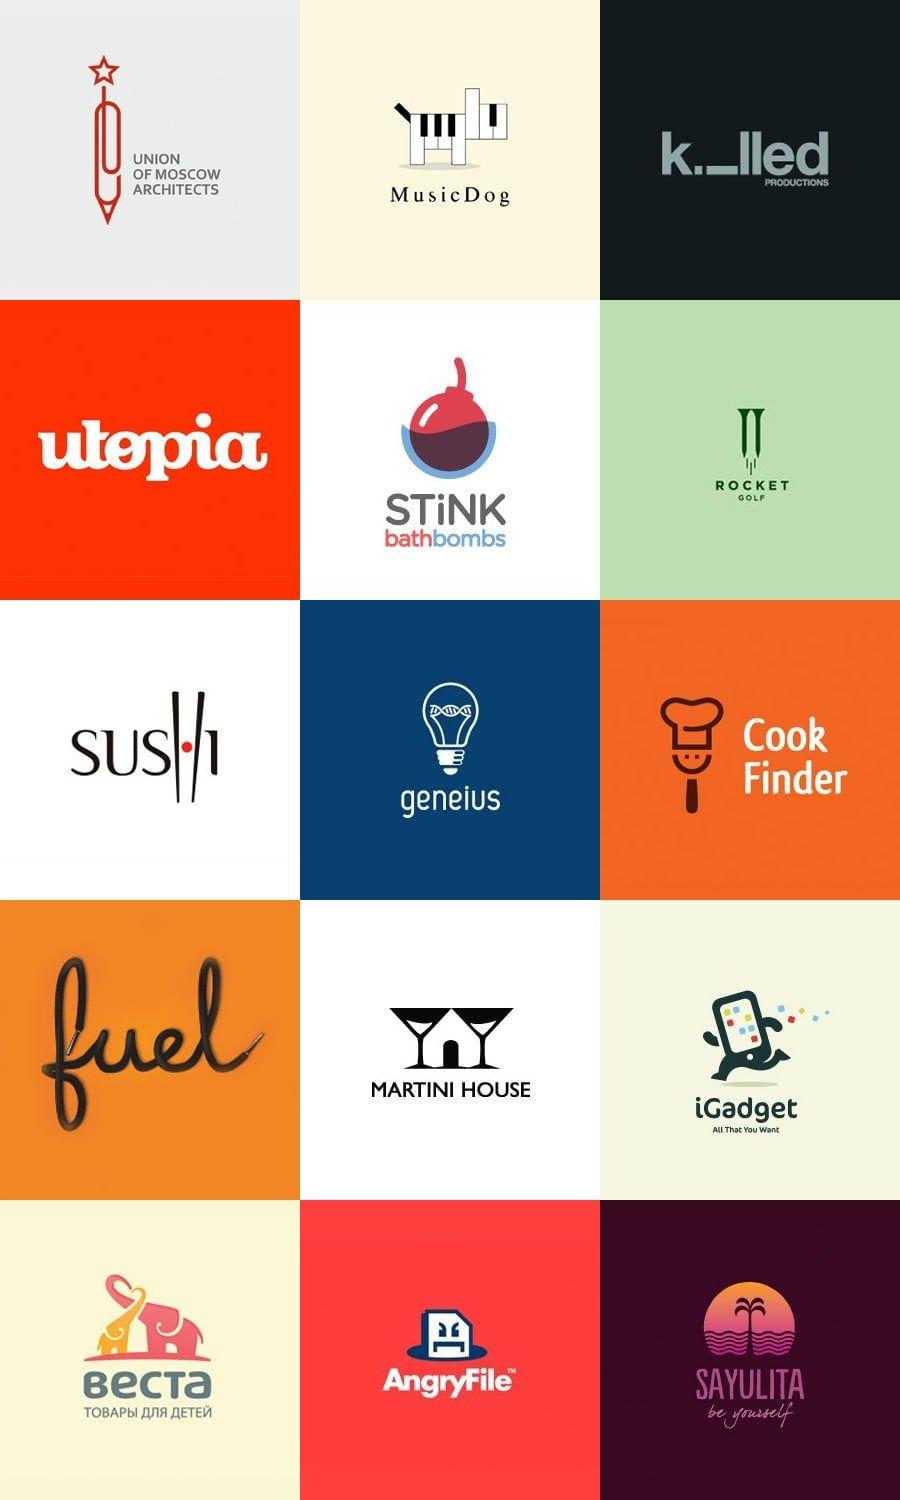 Cool Company Logo - Best and Worst Corporate Logos: Examples of Creative Designs and